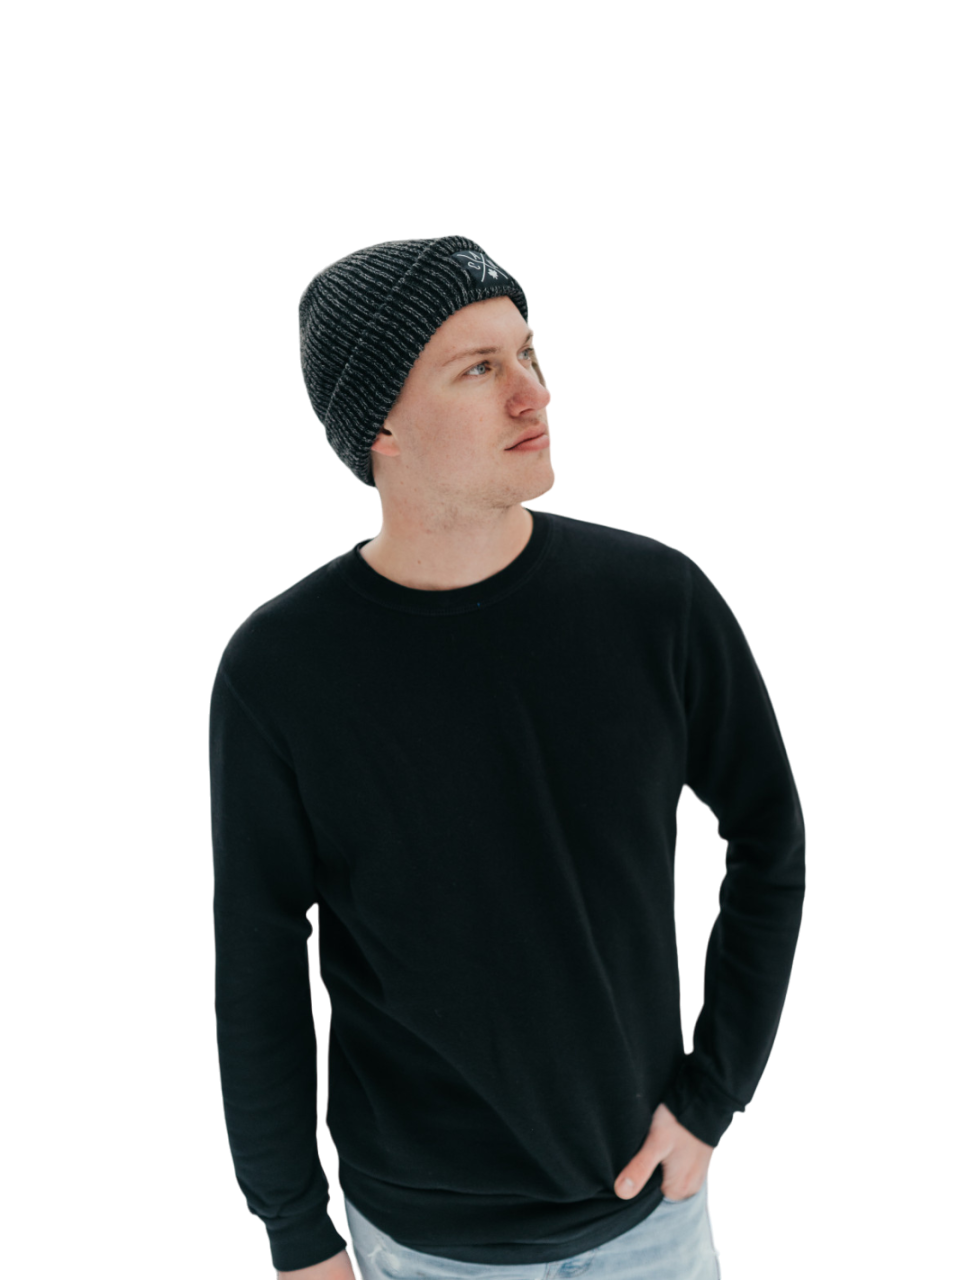 Individual wearing a blank black unisex canadian made sweater. The crewneck represents sustainable fashion, comfort, and local manufacturing